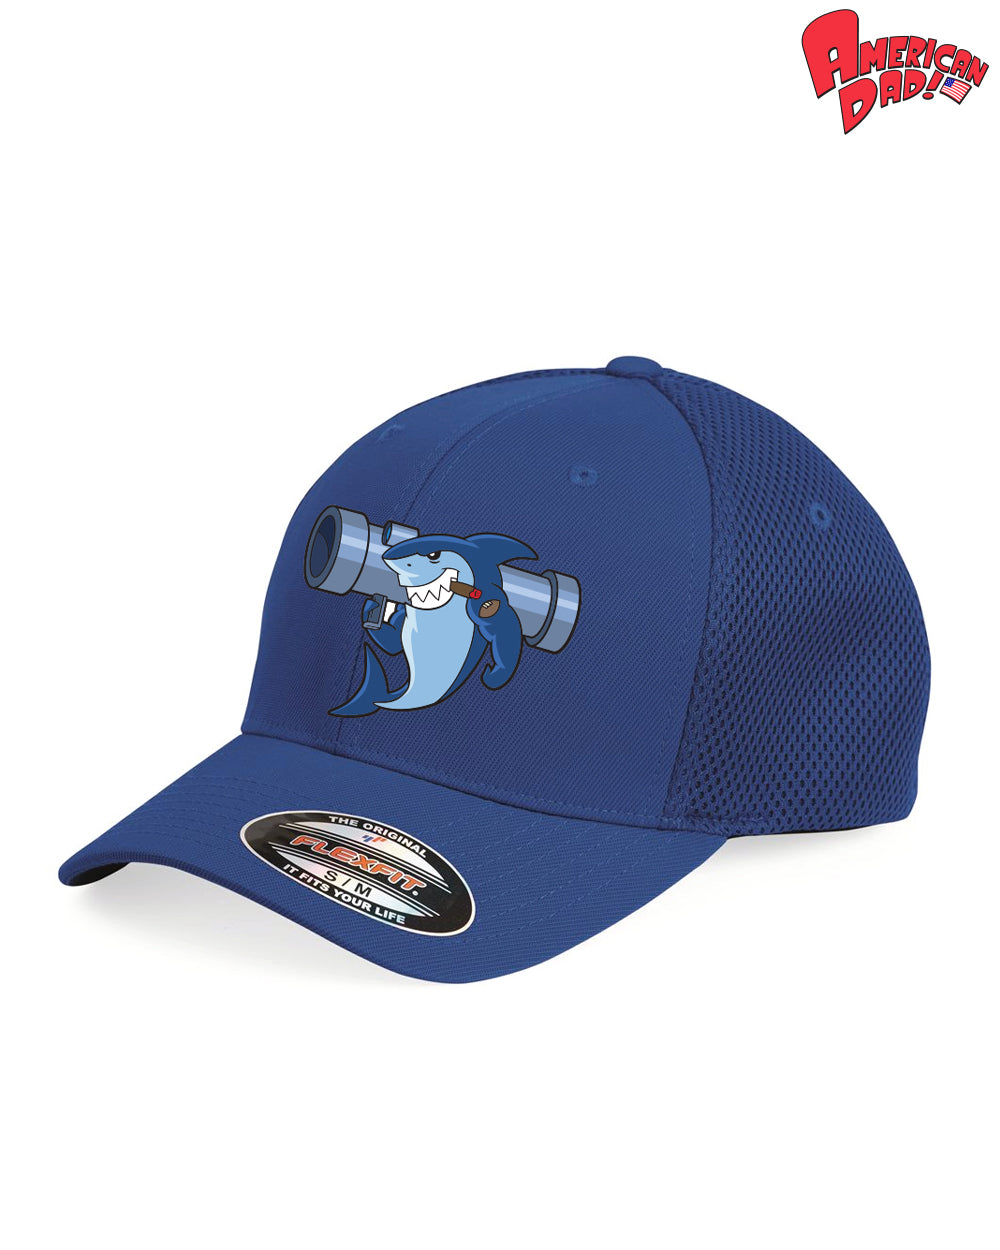 2021 American Dad Bazooka Sharks embroidered hat (pre-order, ships 8/15-8/30)